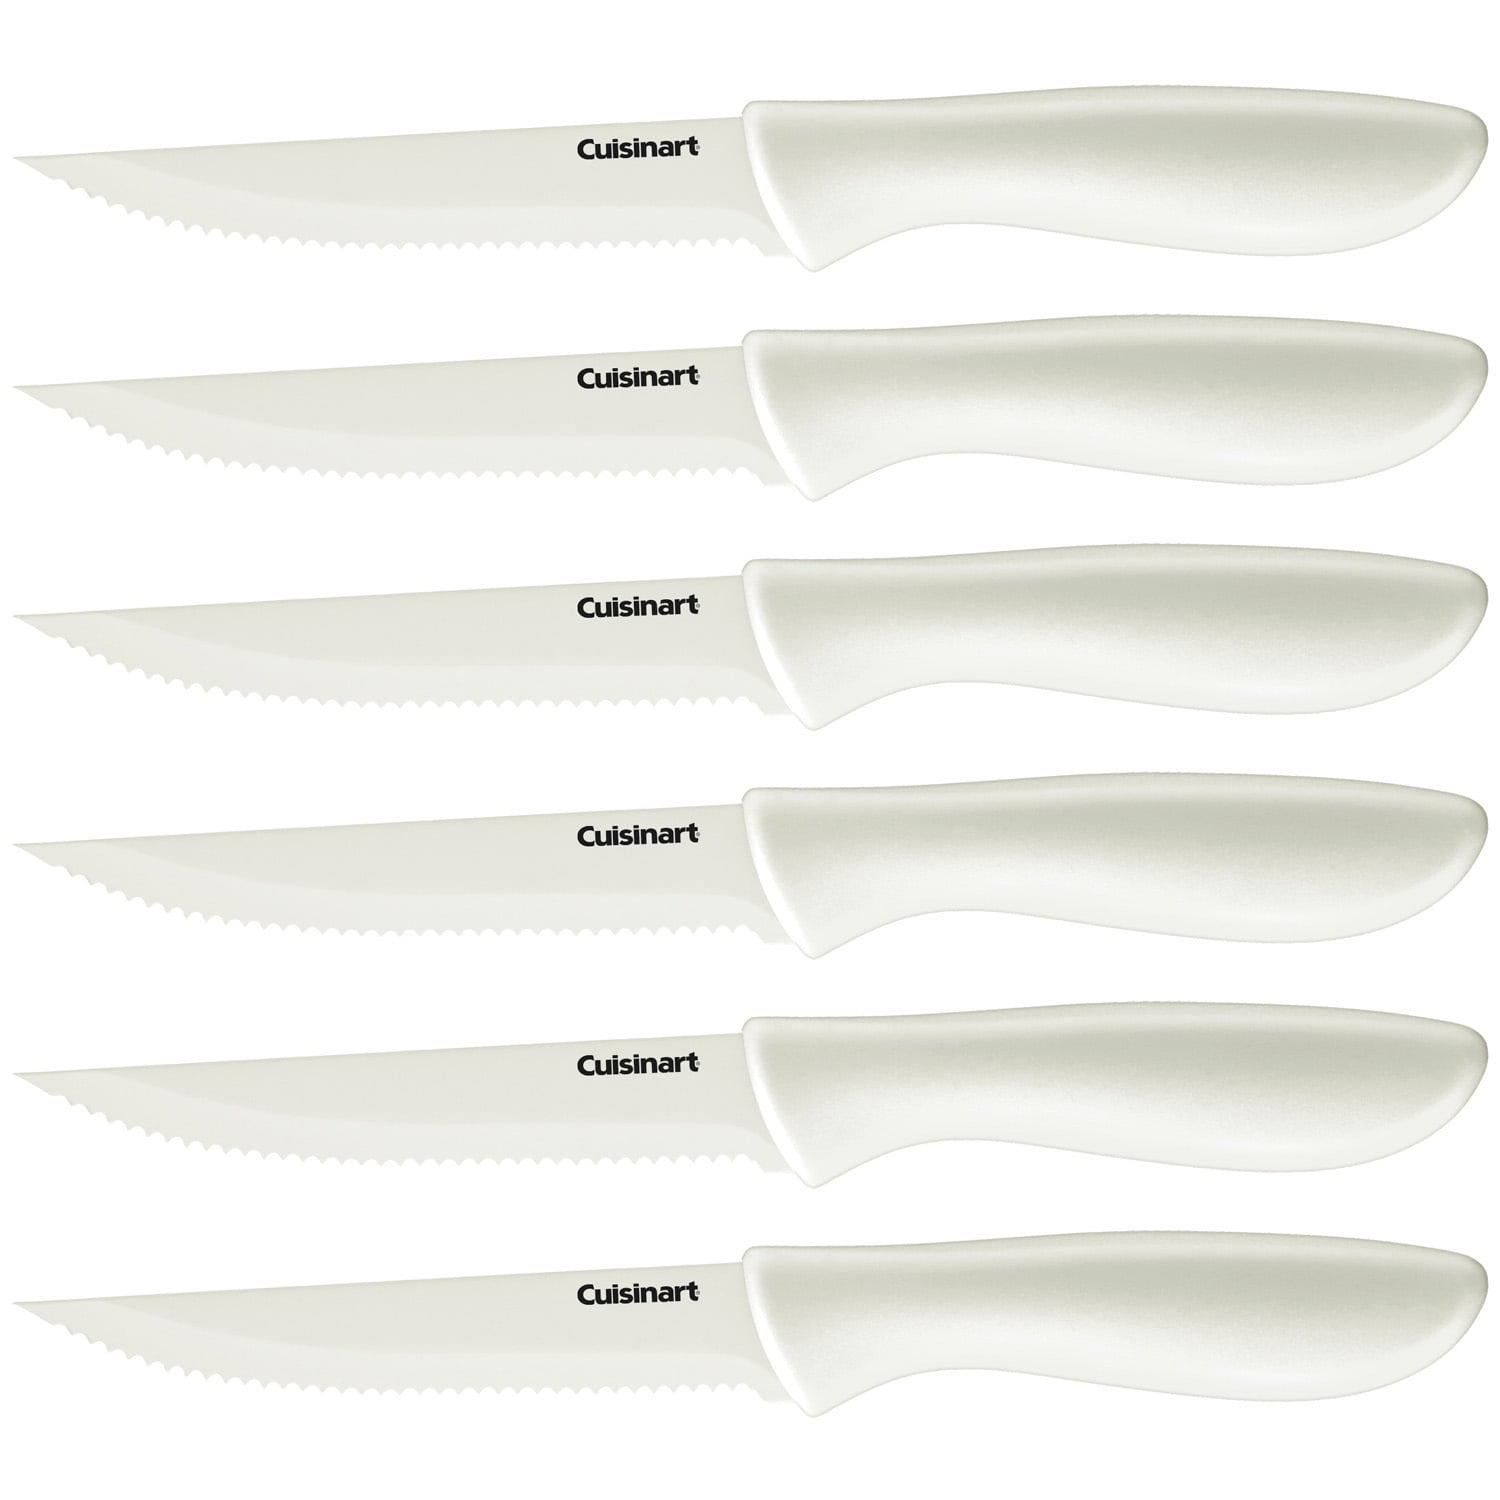 Cuisinart C55-6PCSW Advantage 6-Piece Ceramic Coated Serrated Steak Knife  Set, White (2-Pack) Bundle with Deco Gear Safety Cut Resistant Gloves and  Deco Essentials 3 Slot Manual Knife Sharpener 